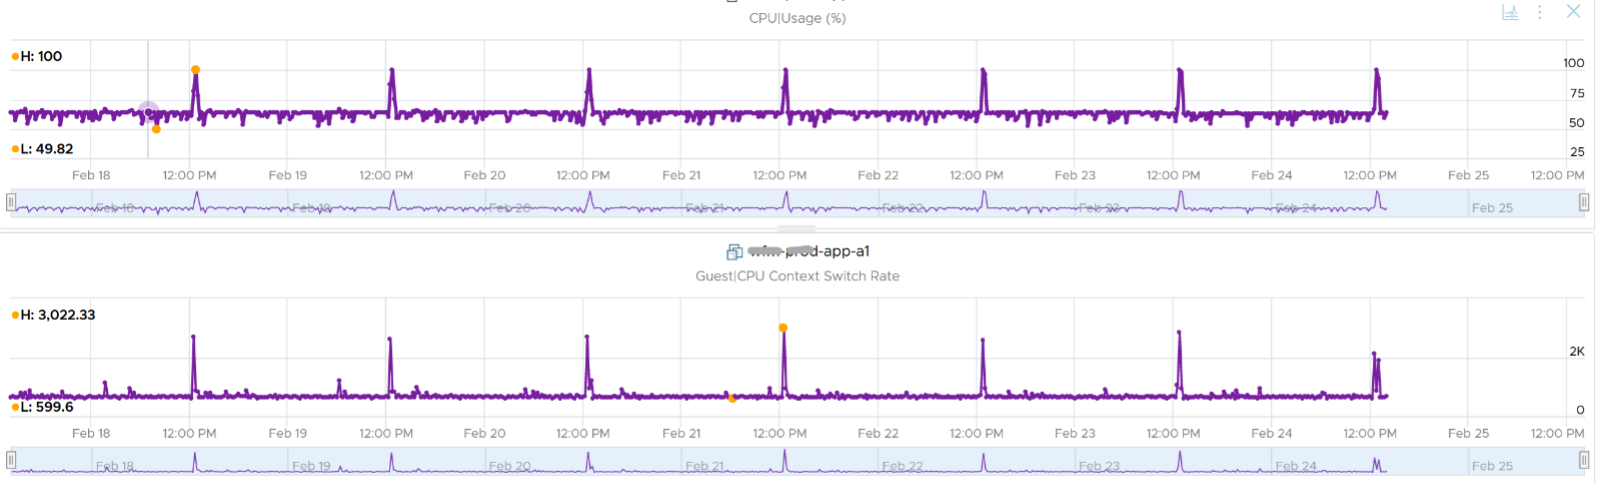 Correlation between CPU usage and context switch